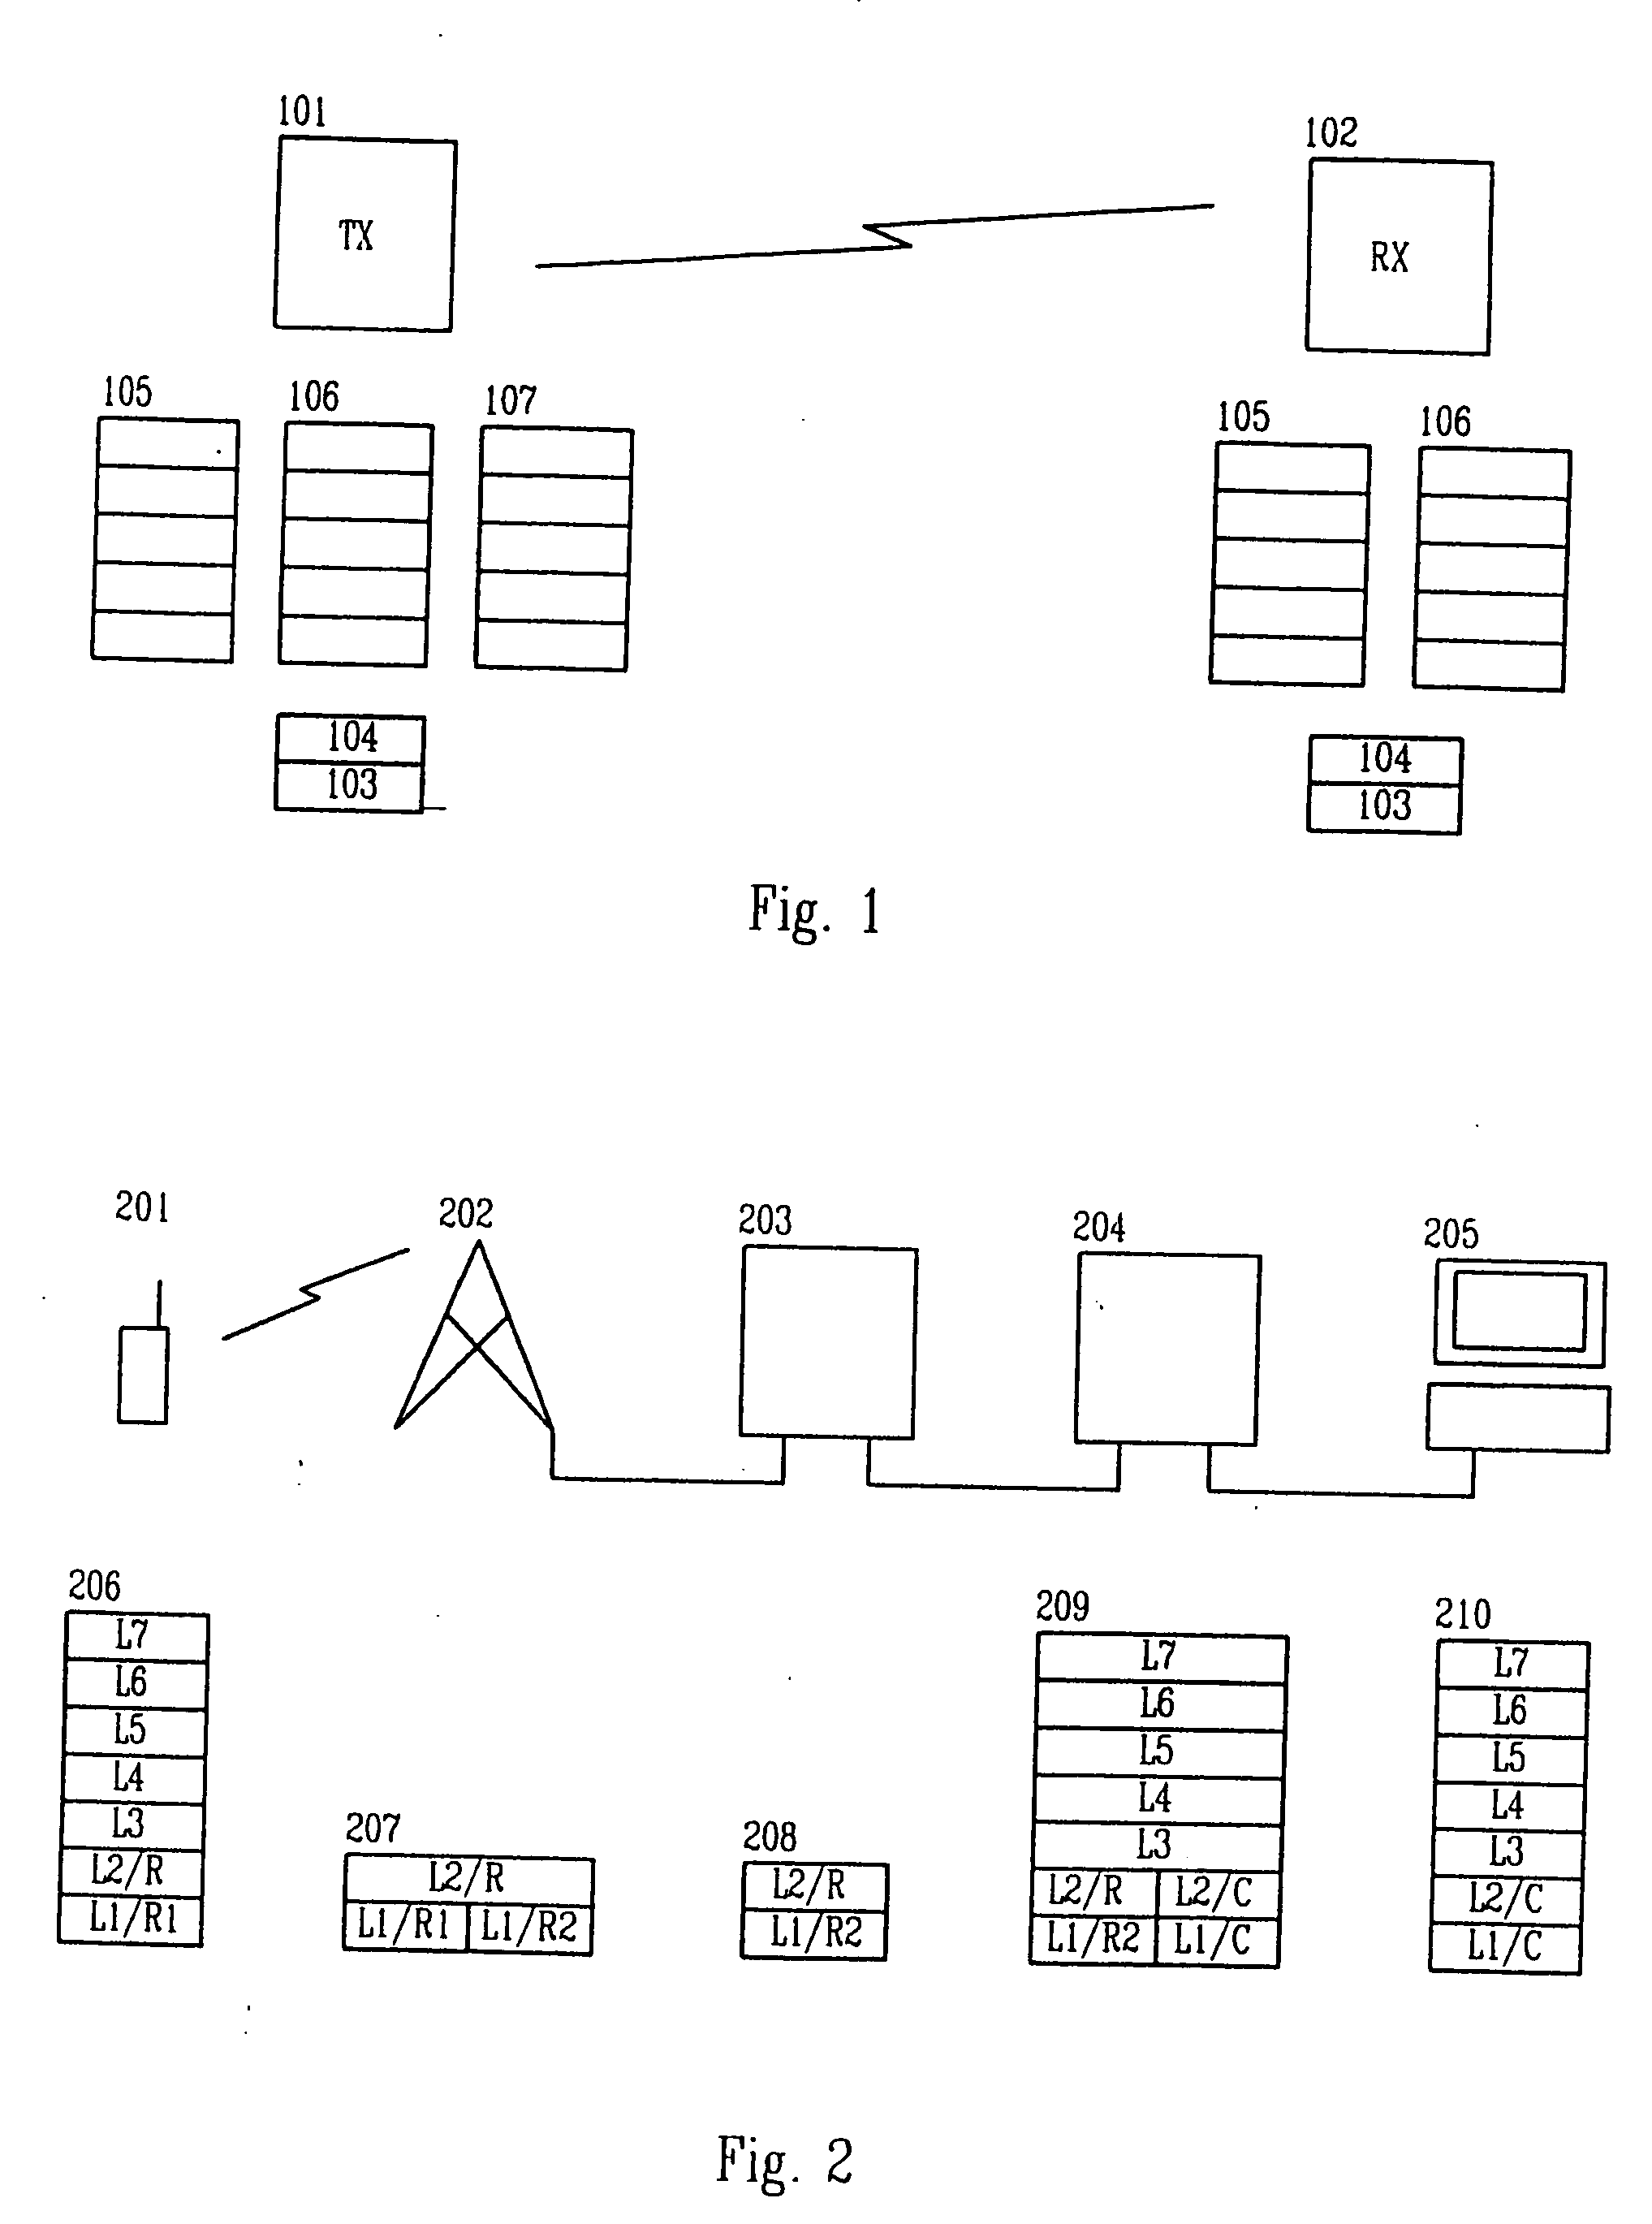 Method for informing layers of a protocol stack about the protocol in use